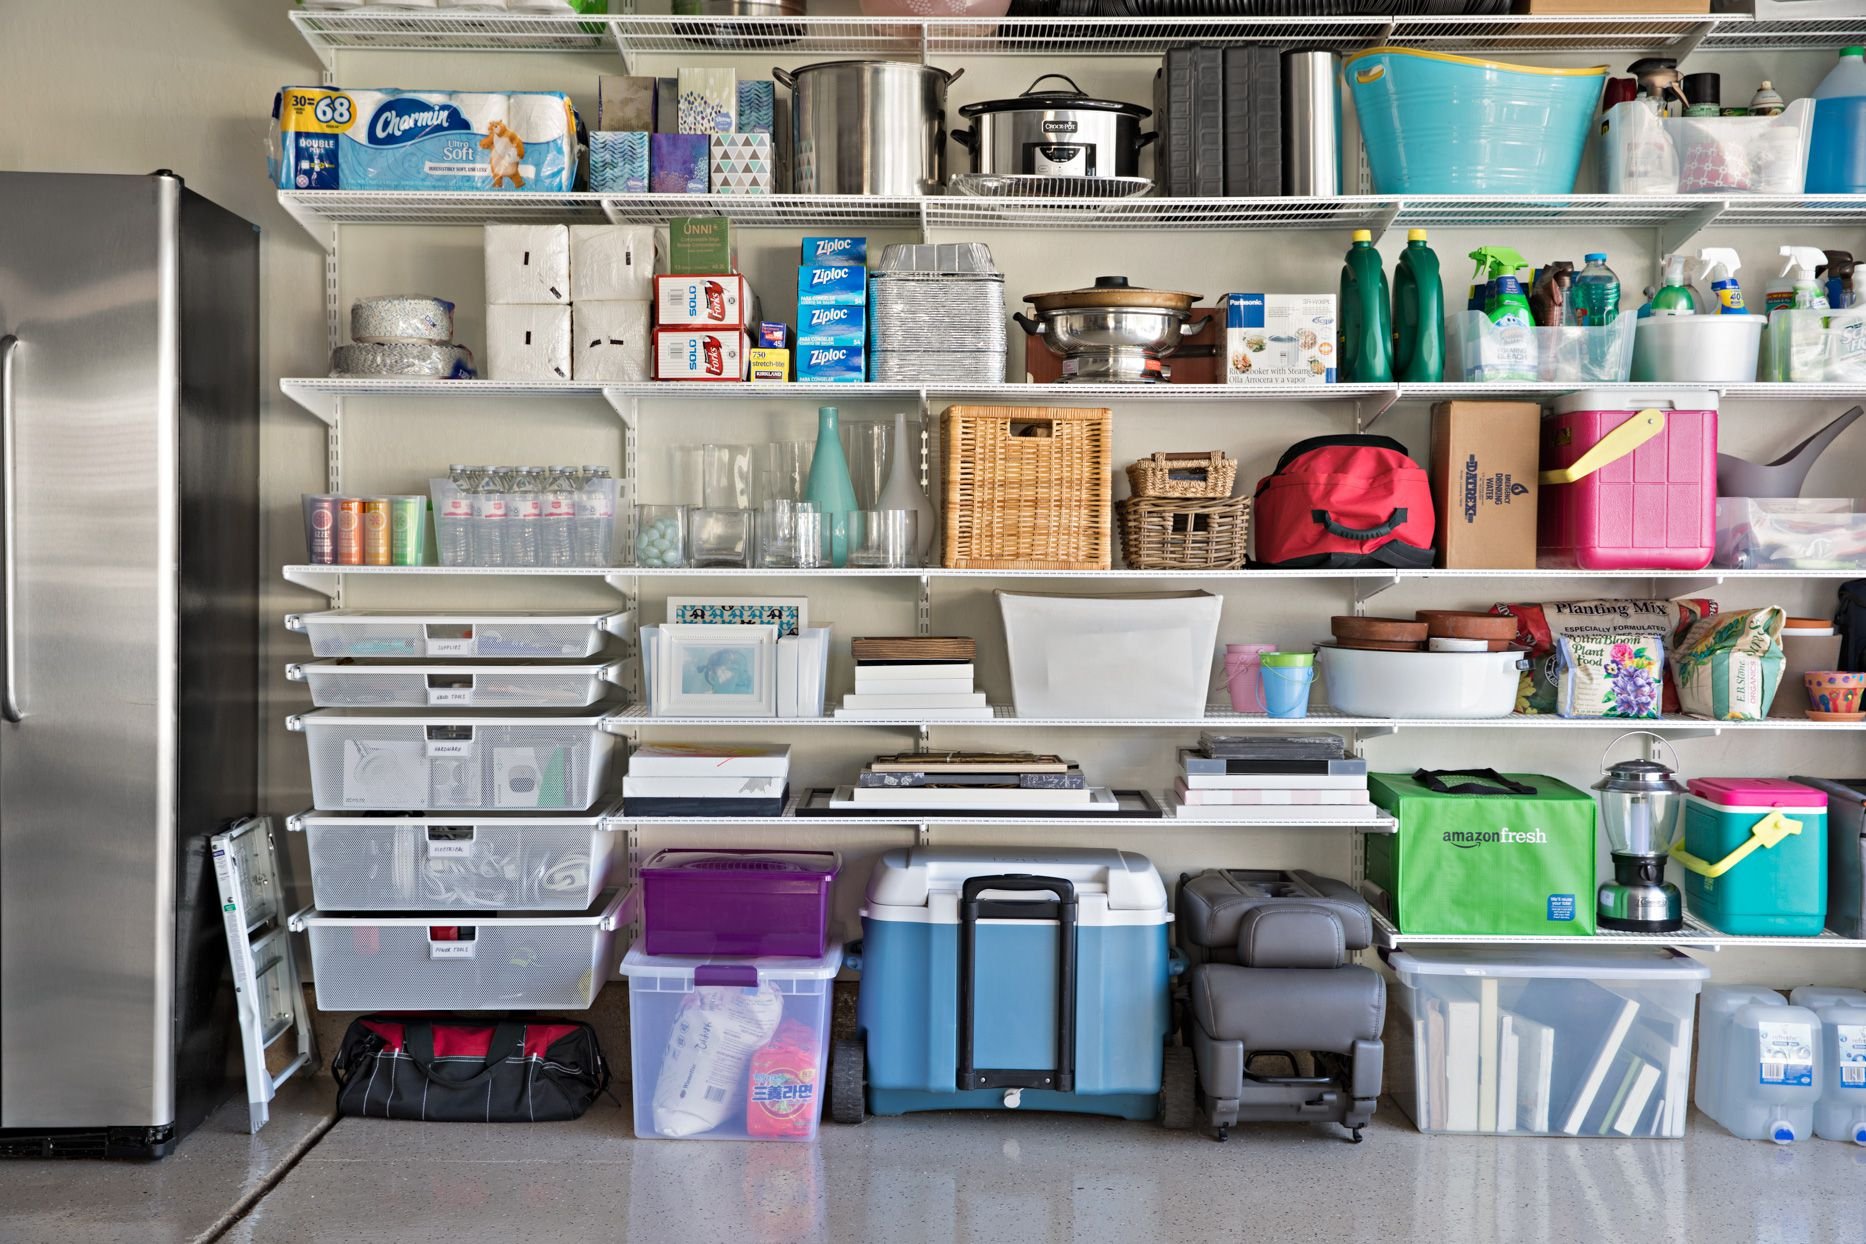 8 Space-Stealing Items to Purge from Your Garage